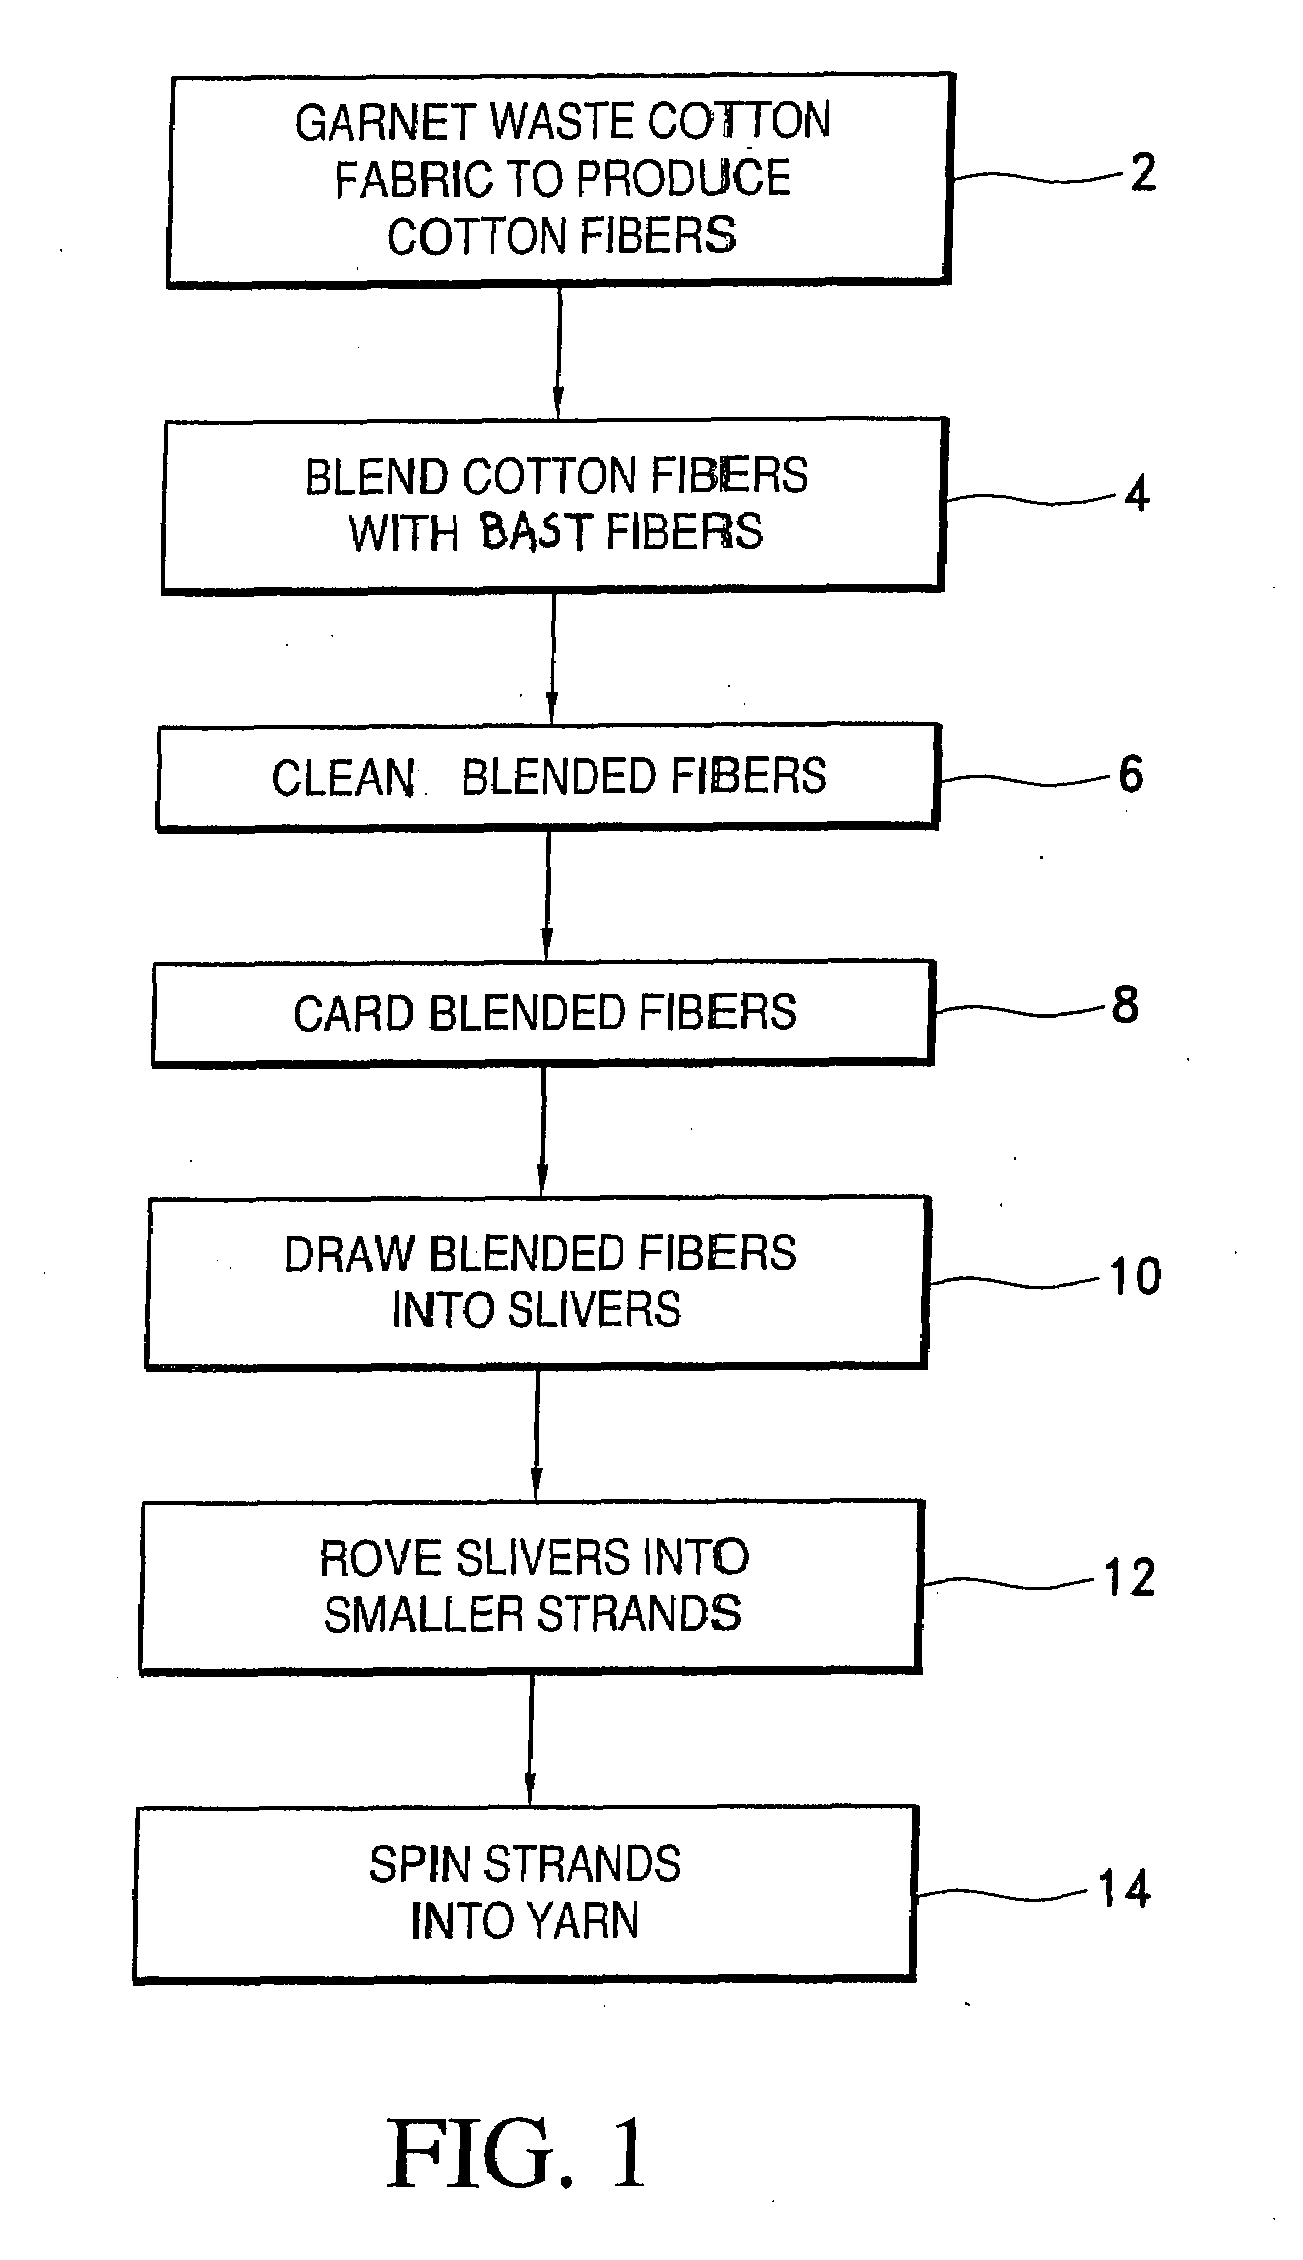 Composite regenerated cotton and bast fiber yarn and method for making the same